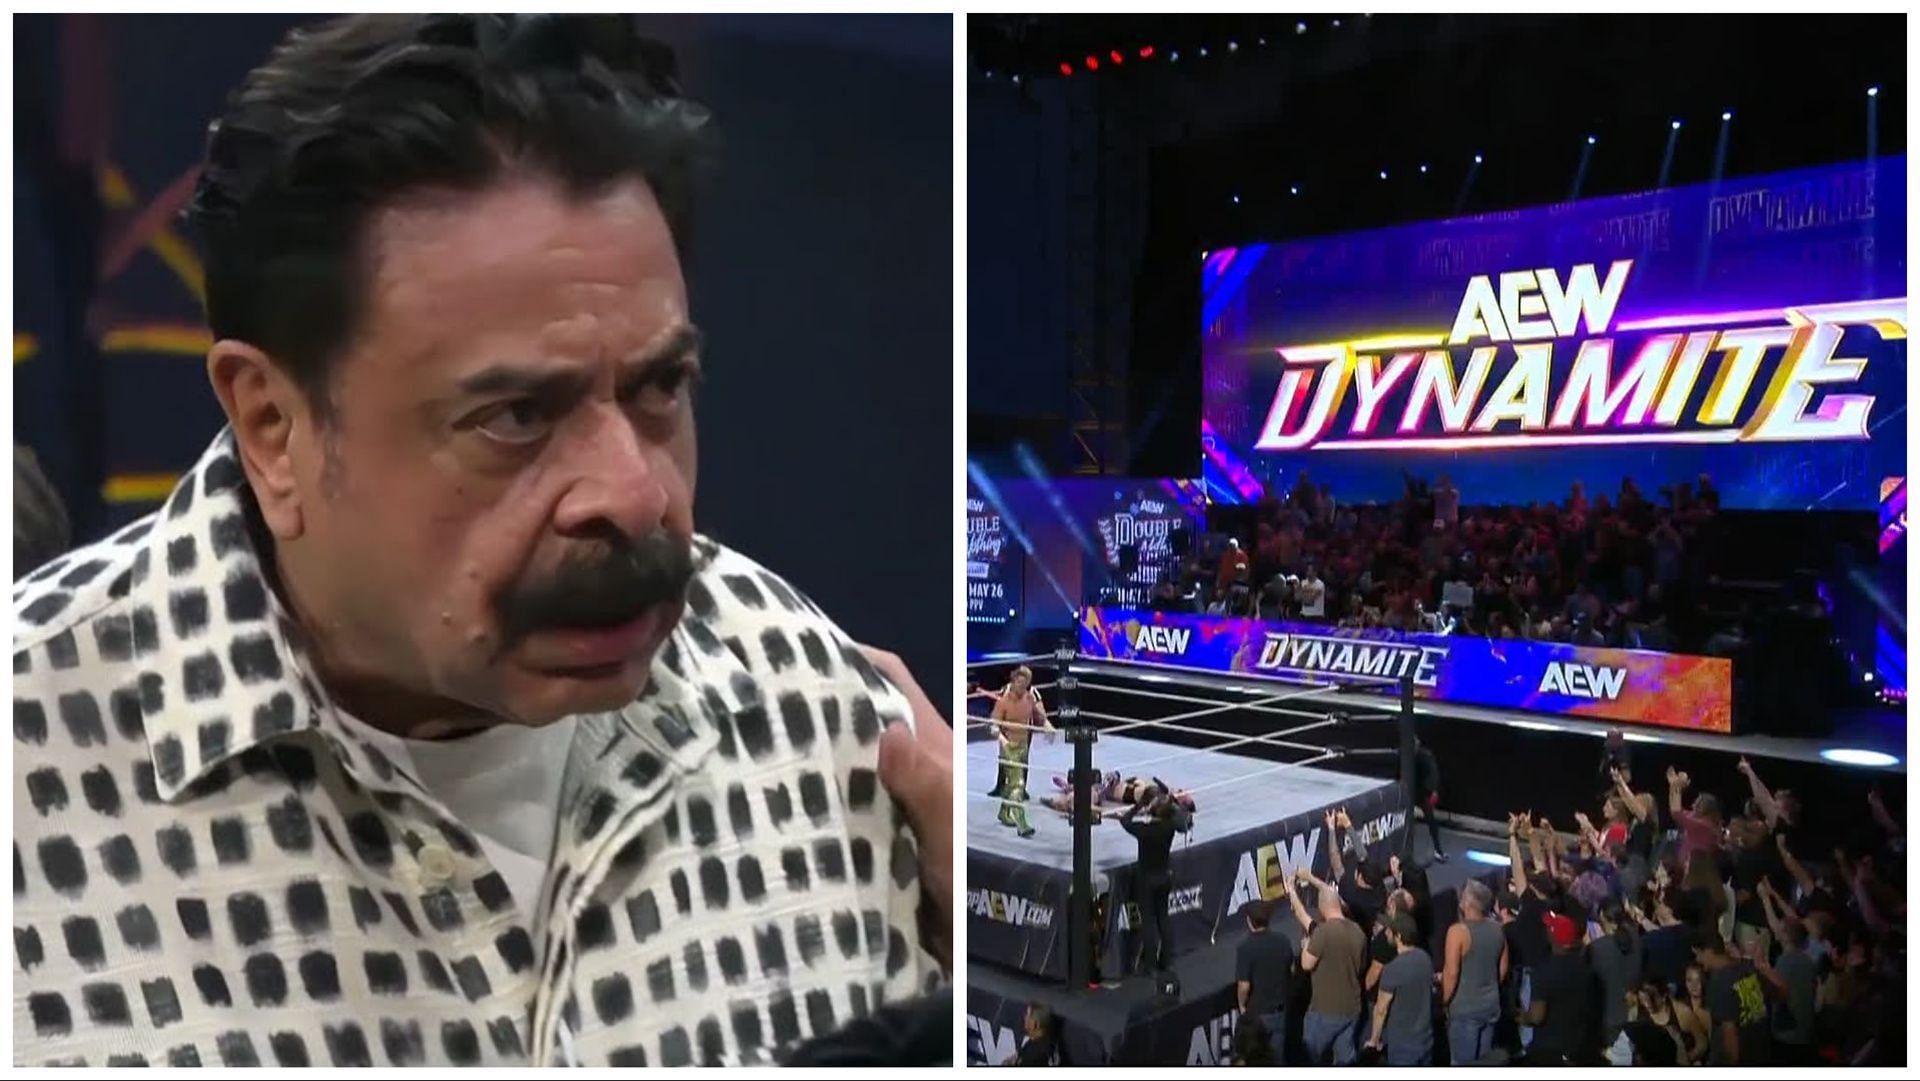 Shahid &quot;Shad&quot; Khan on AEW Dynamite, AEW fans pack Daily